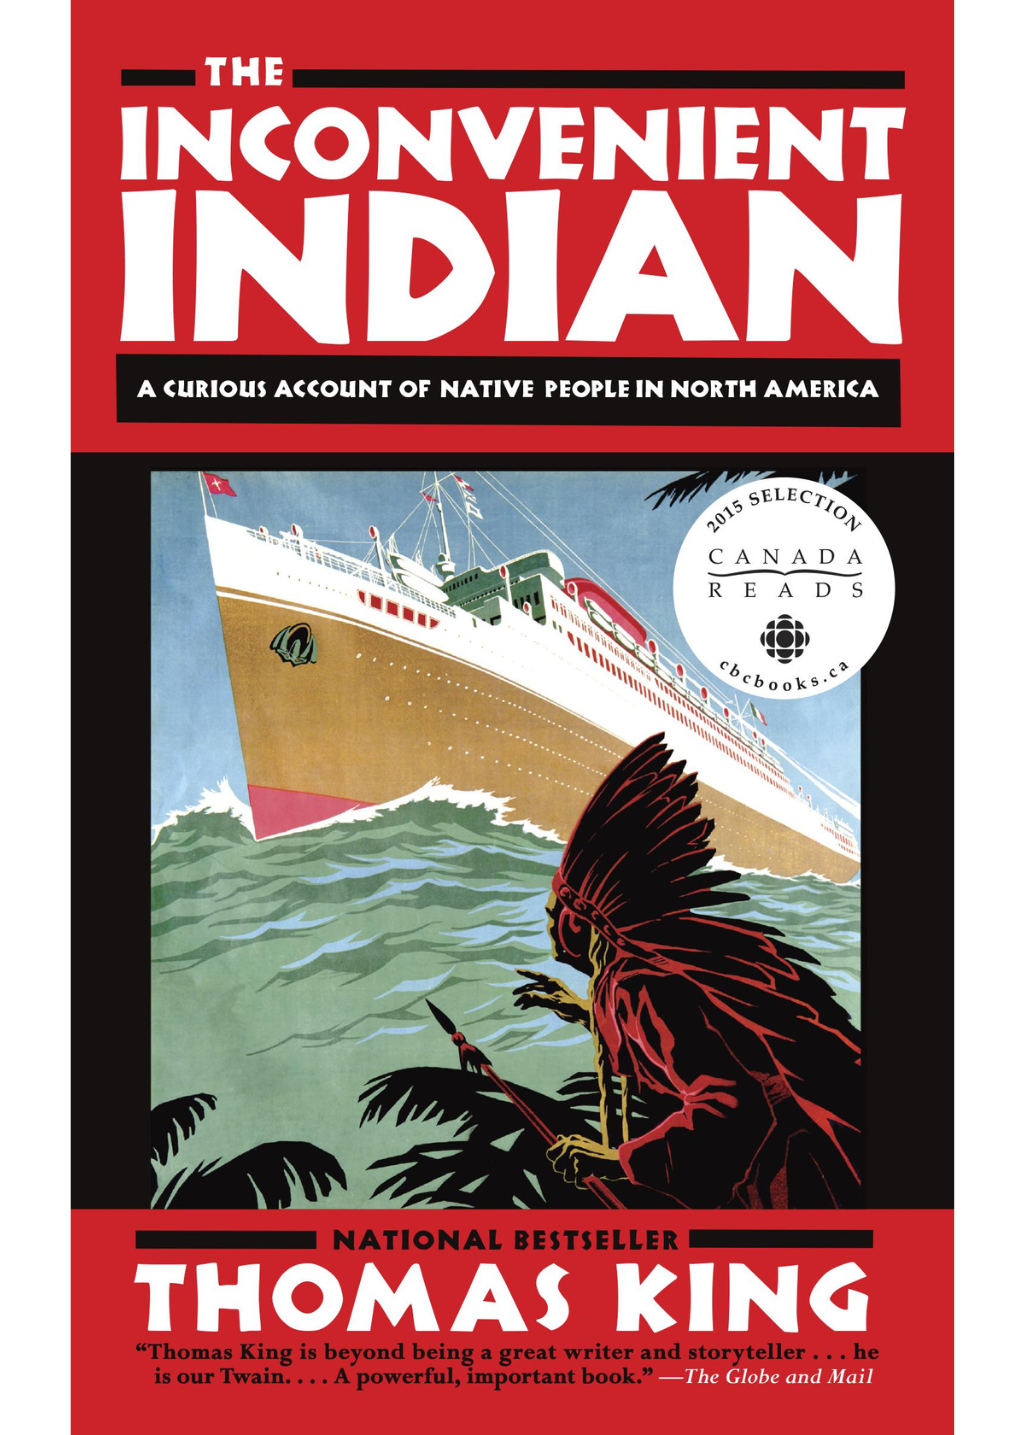 The Inconvenient Indian - A Curious Account of Native People in North America - Hardpressed Print Studio Inc.